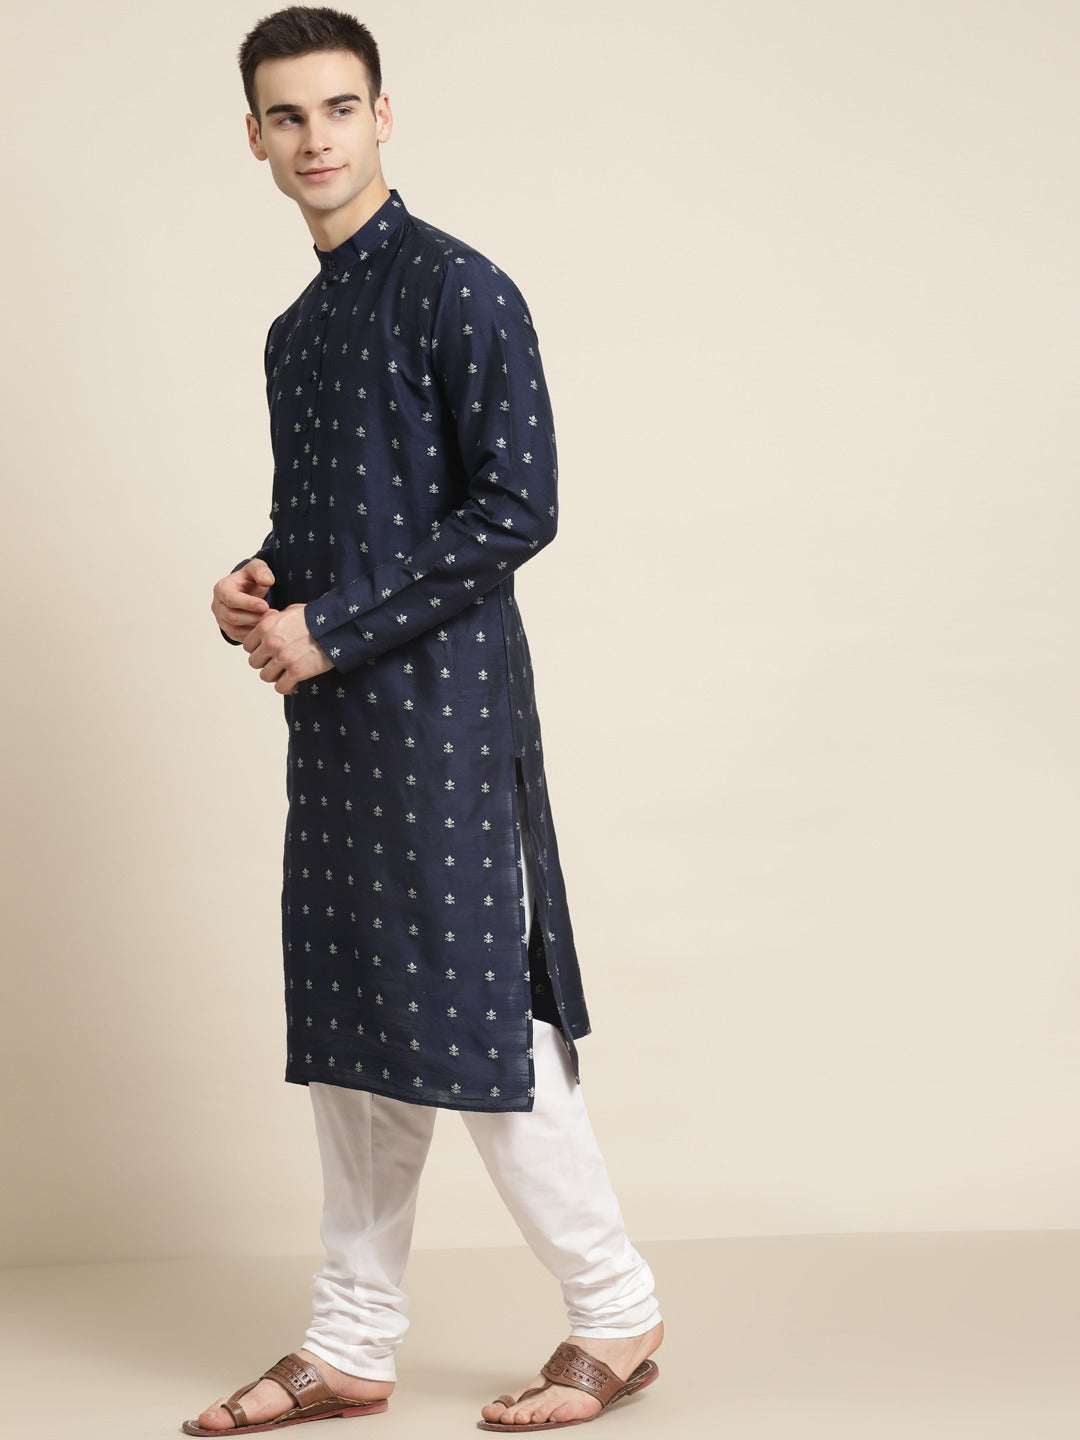 Navy White Kurta Set Indian Clothing in Denver, CO, Aurora, CO, Boulder, CO, Fort Collins, CO, Colorado Springs, CO, Parker, CO, Highlands Ranch, CO, Cherry Creek, CO, Centennial, CO, and Longmont, CO. NATIONWIDE SHIPPING USA- India Fashion X